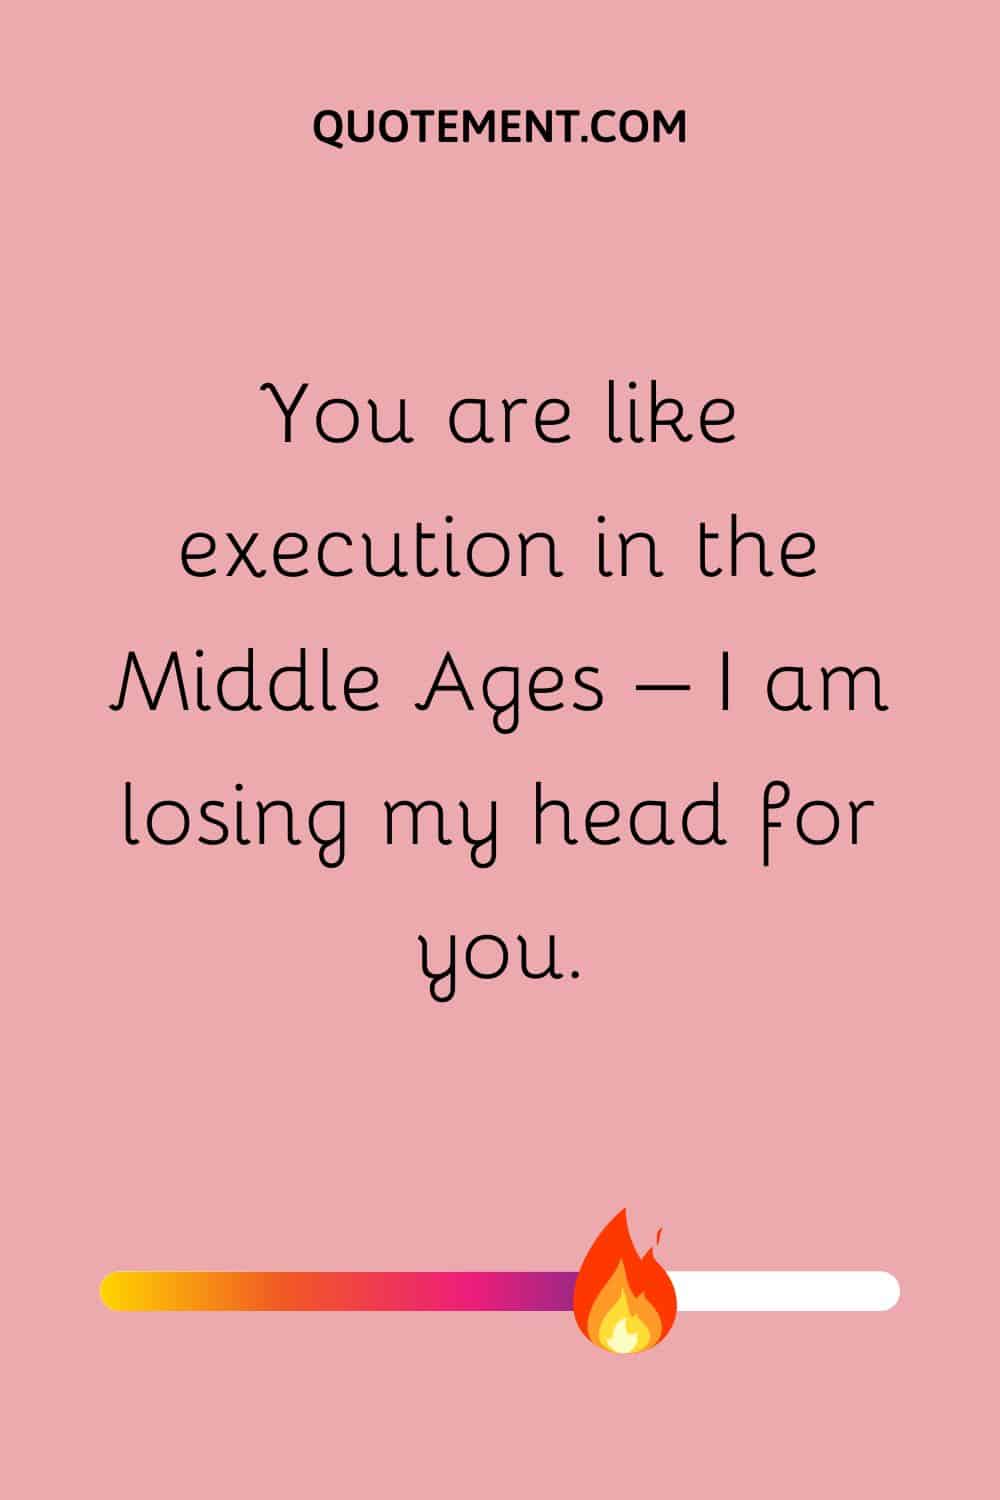 You are like execution in the Middle Ages